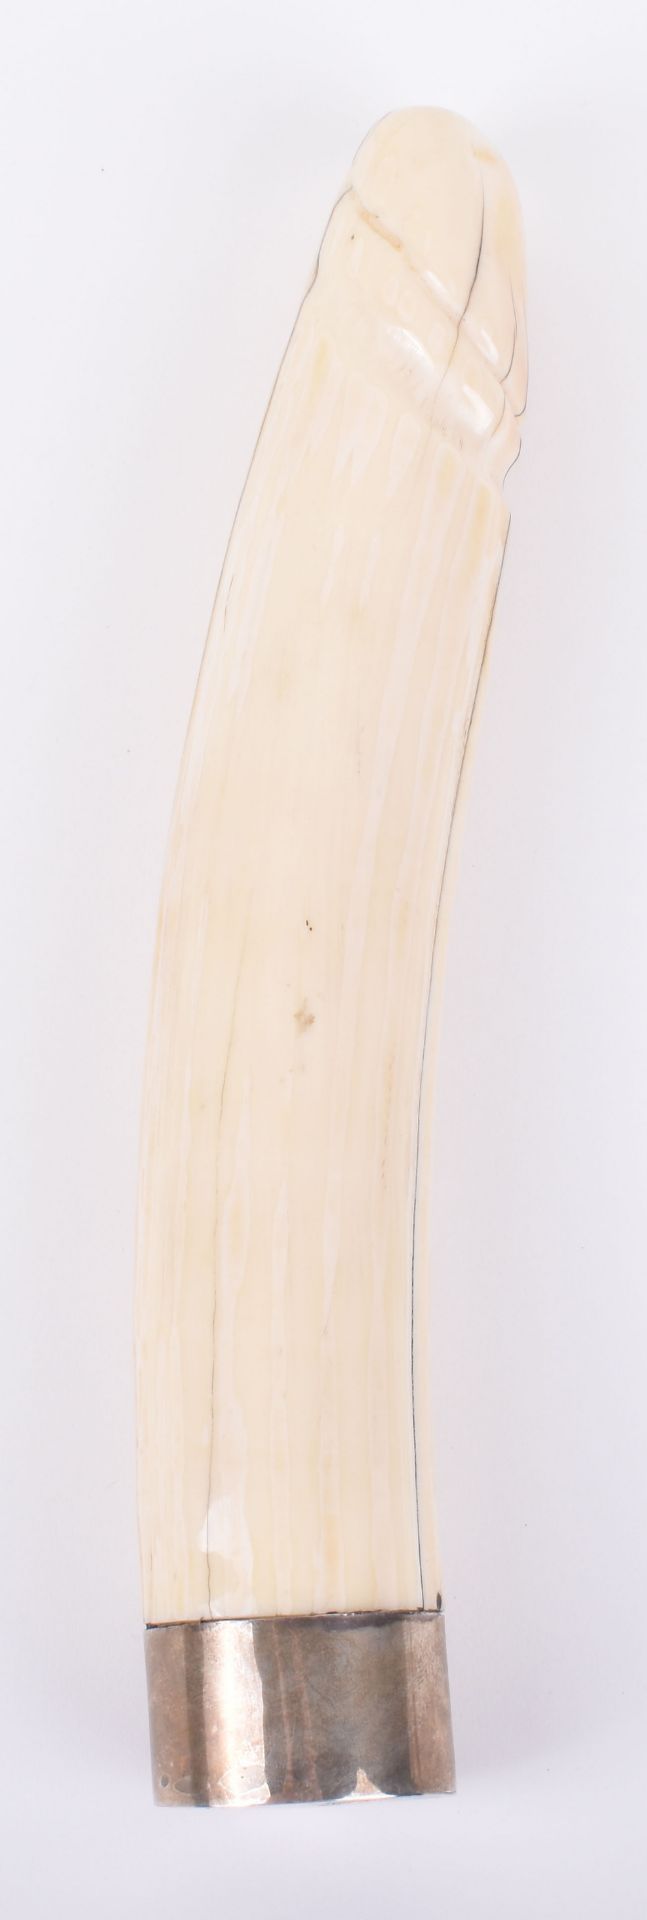 ^A 19th century carved ivory phallus erotica figure - Image 2 of 6